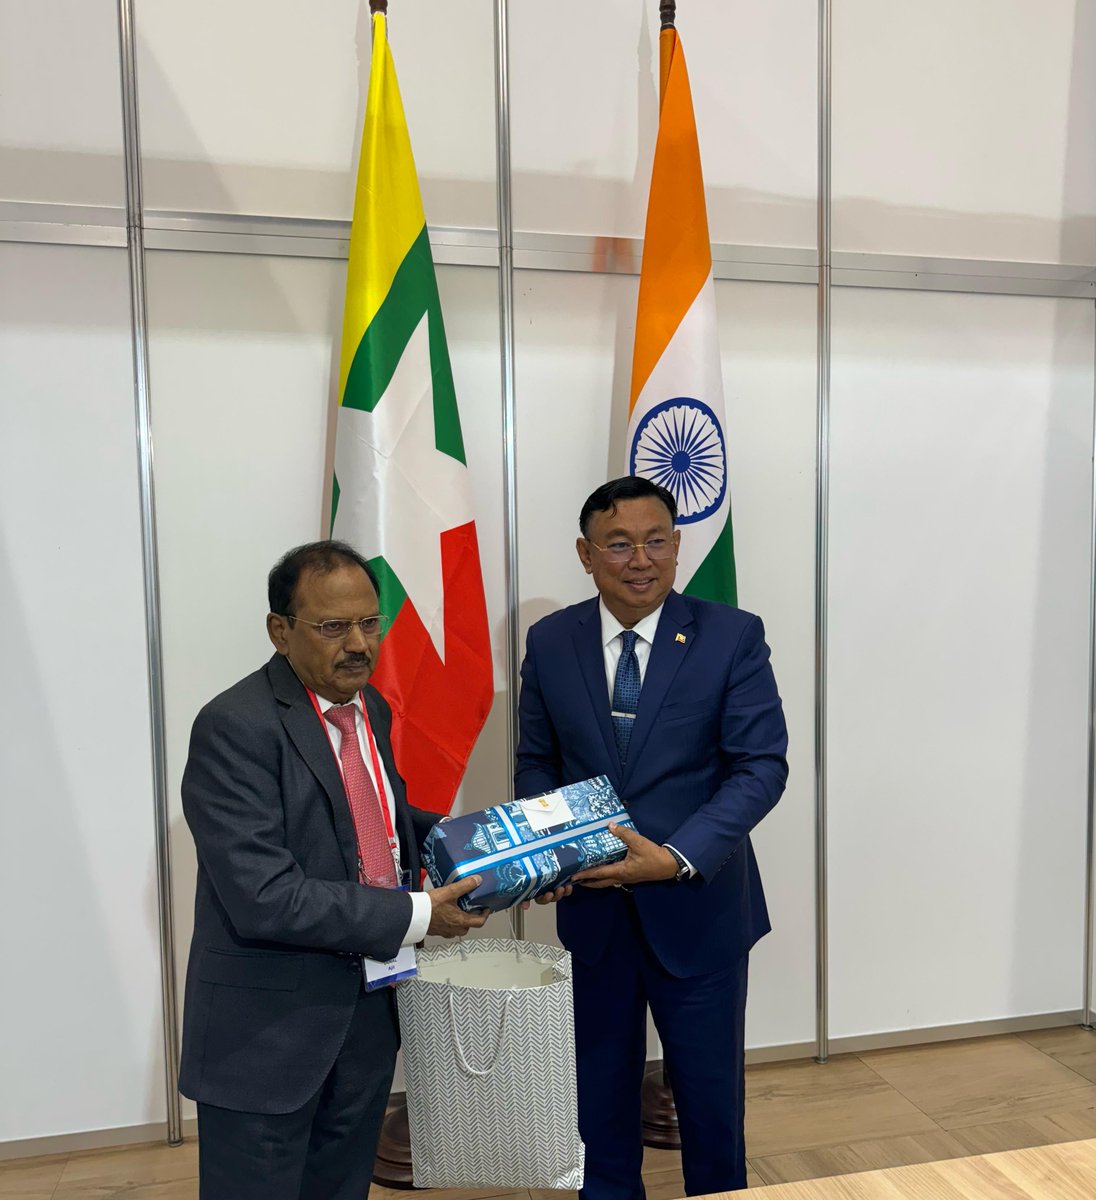 On the sidelines of the XII International Meeting of High Ranking Officials Responsible for Security Matters in St Petersburg, NSA Shri Ajit Doval had a bilateral meeting with his Myanmar counterpart Admiral Moe Aung and talked about the current situation in Myanmar and